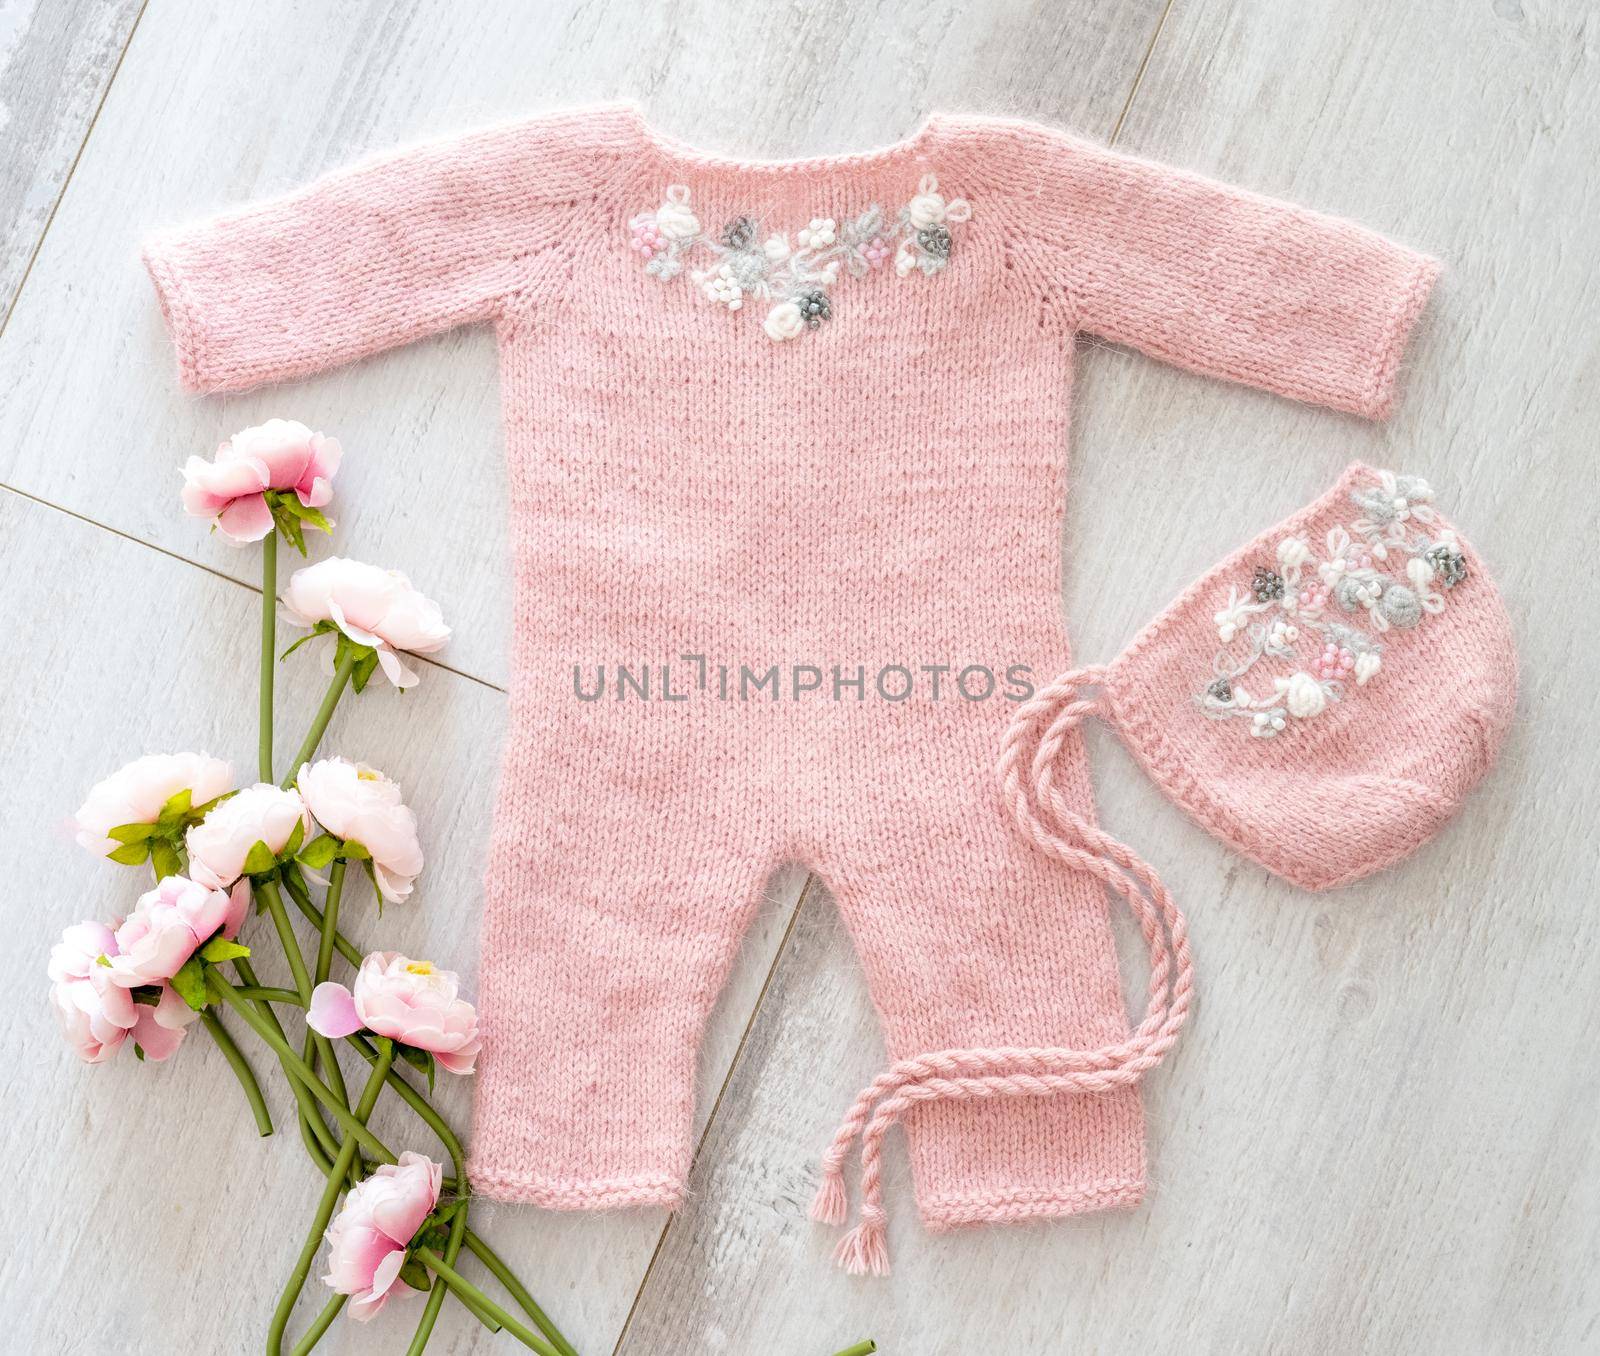 Simple knitted handmade clothes for newborn babies. topview props for photo sessions